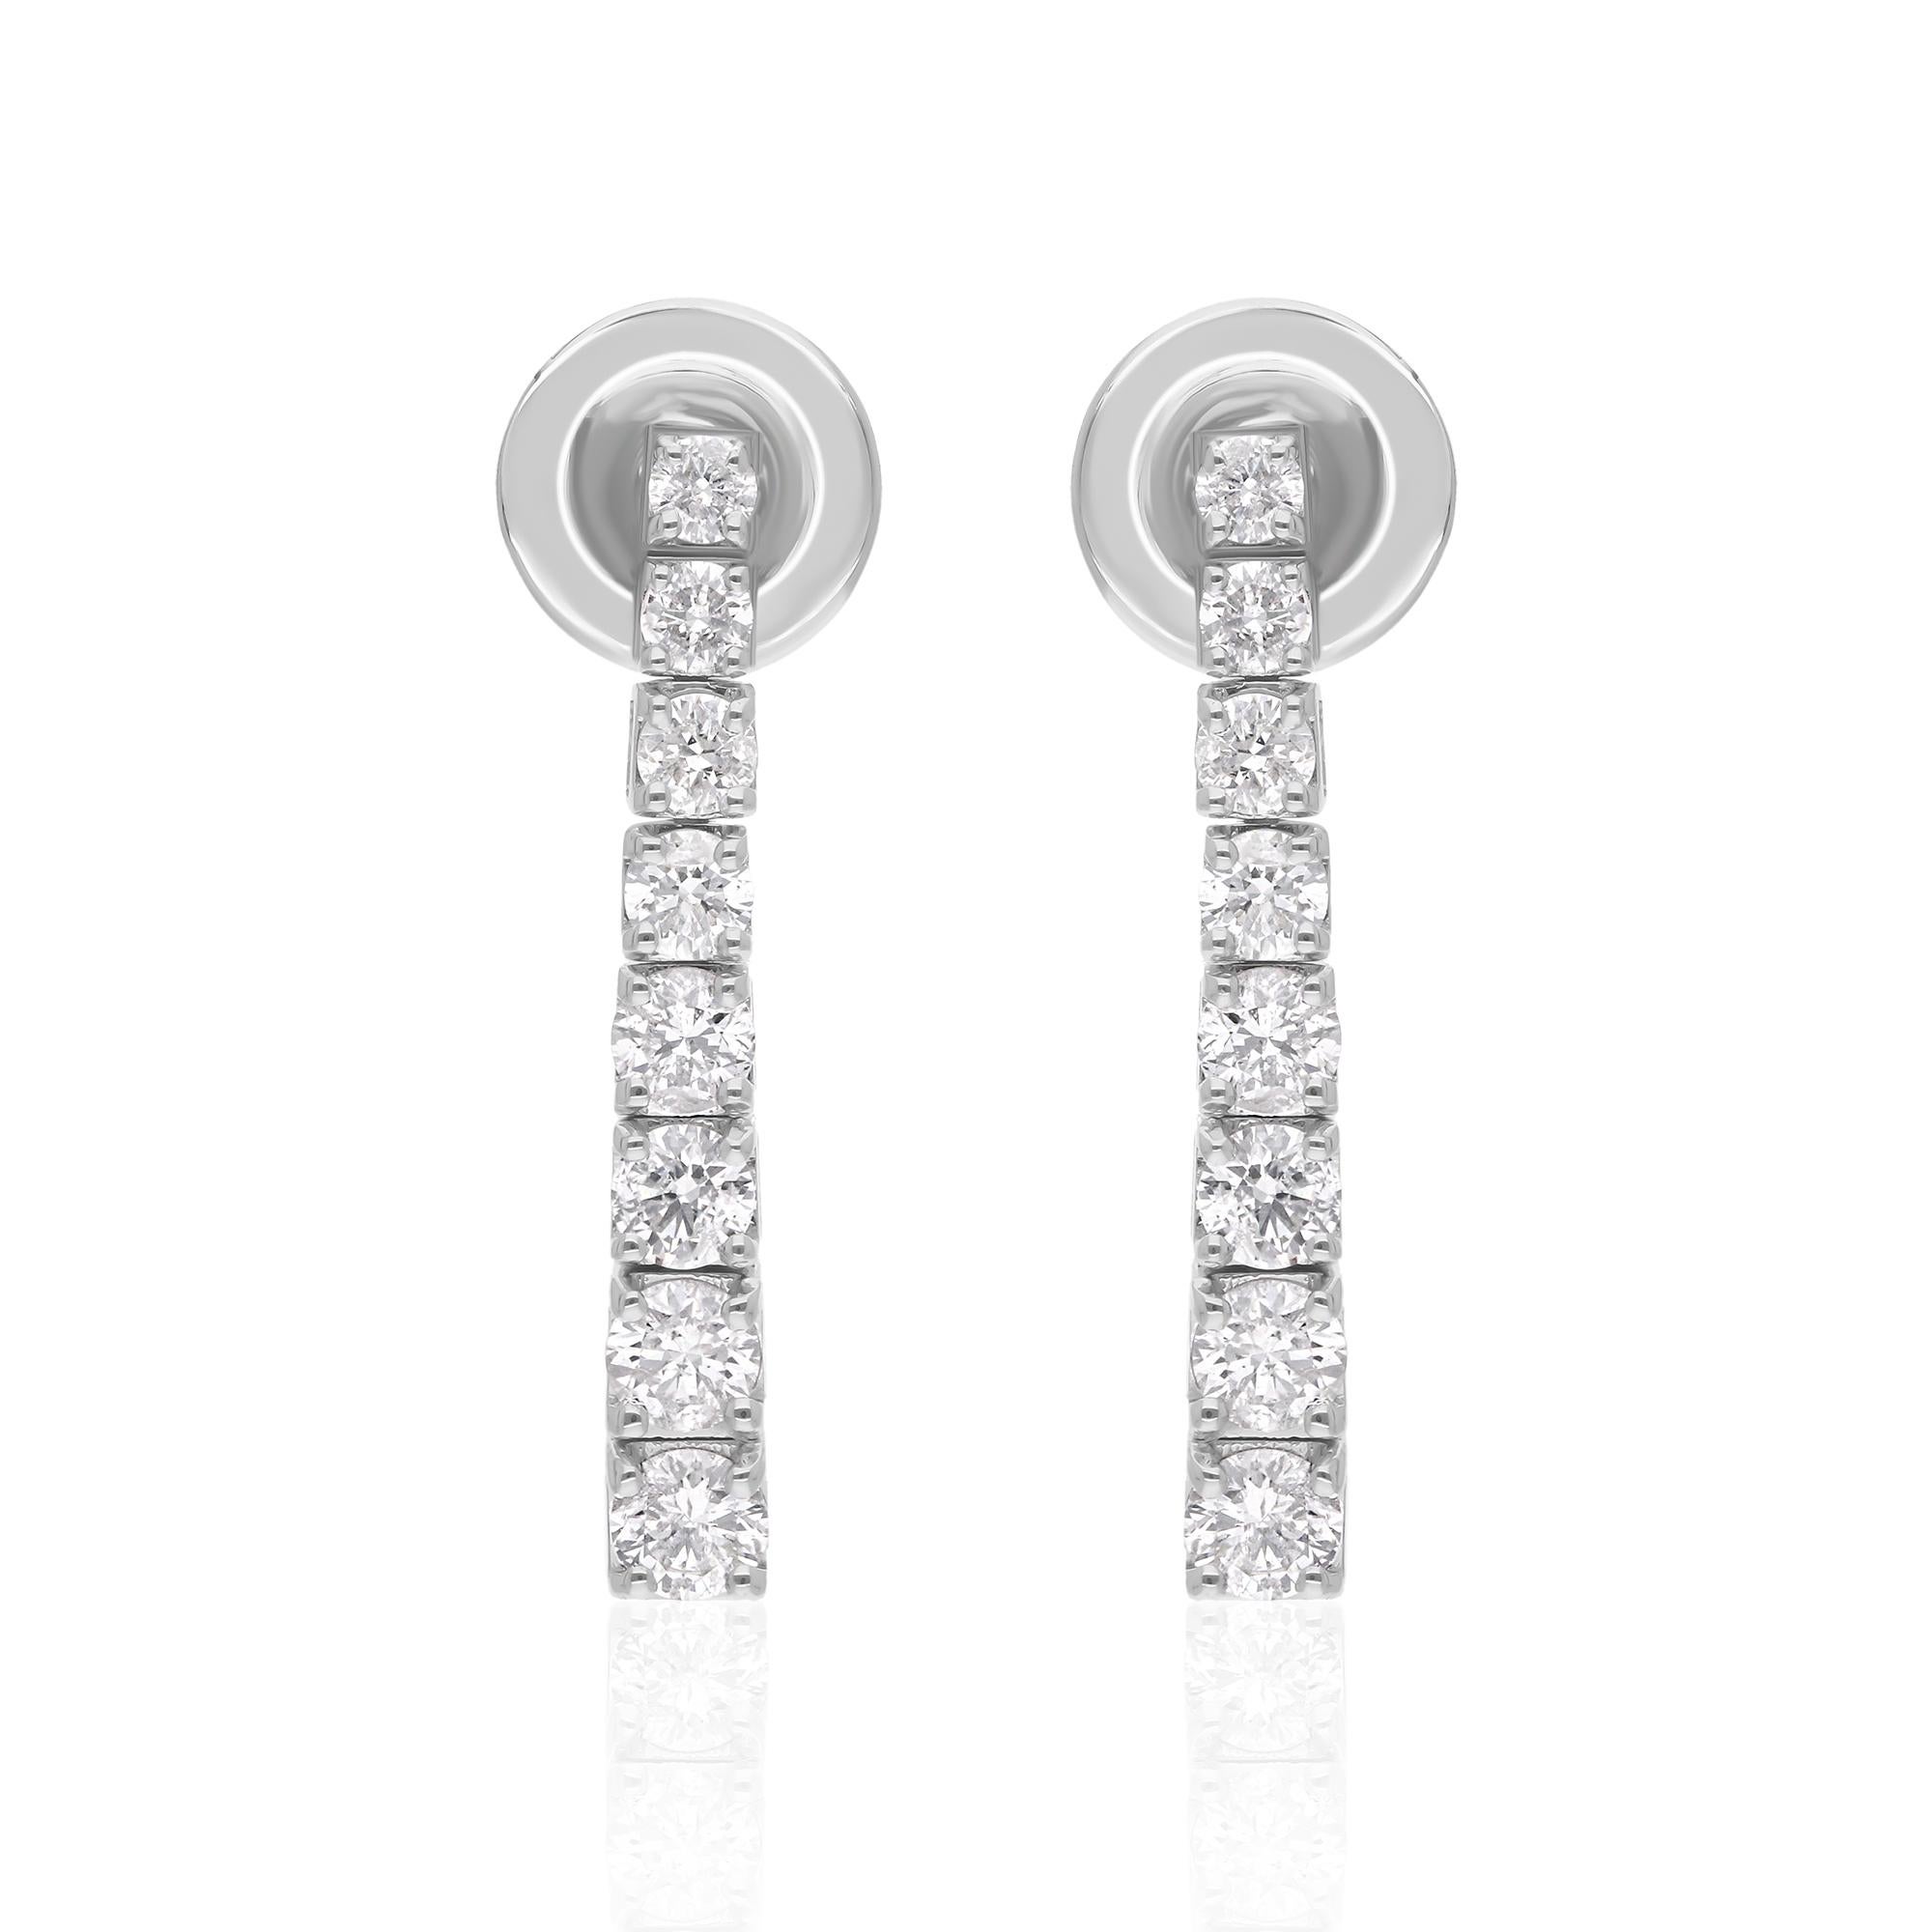 Set in lustrous 14 Karat White Gold, these earrings exude luxury and refinement. The precious metal provides the perfect backdrop for the diamonds, enhancing their natural brilliance and ensuring durability for years to come. Handcrafted with